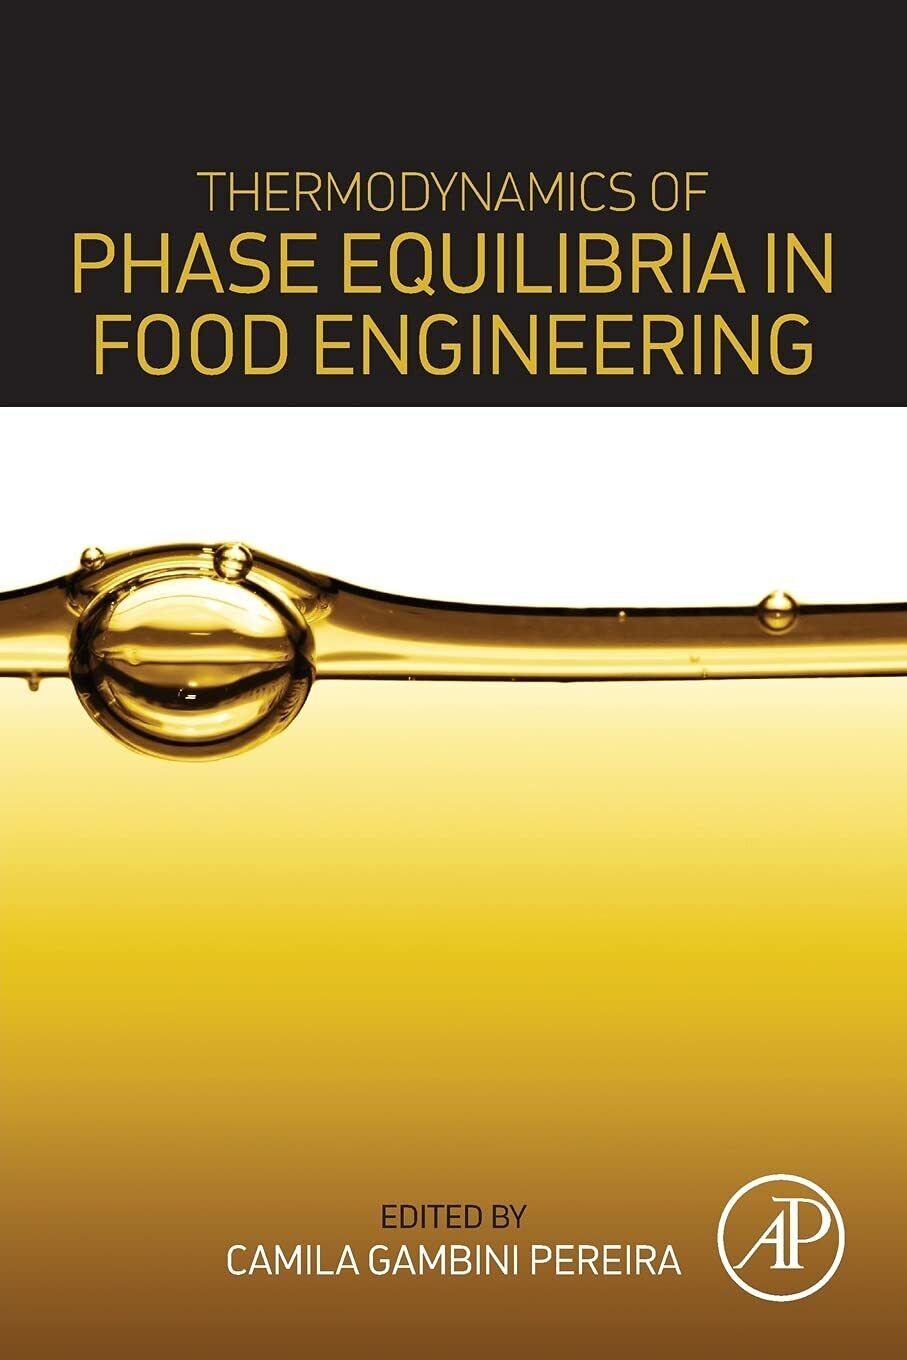 Thermodynamics of Phase Equilibria in Food Engineering - Pereira - 2018